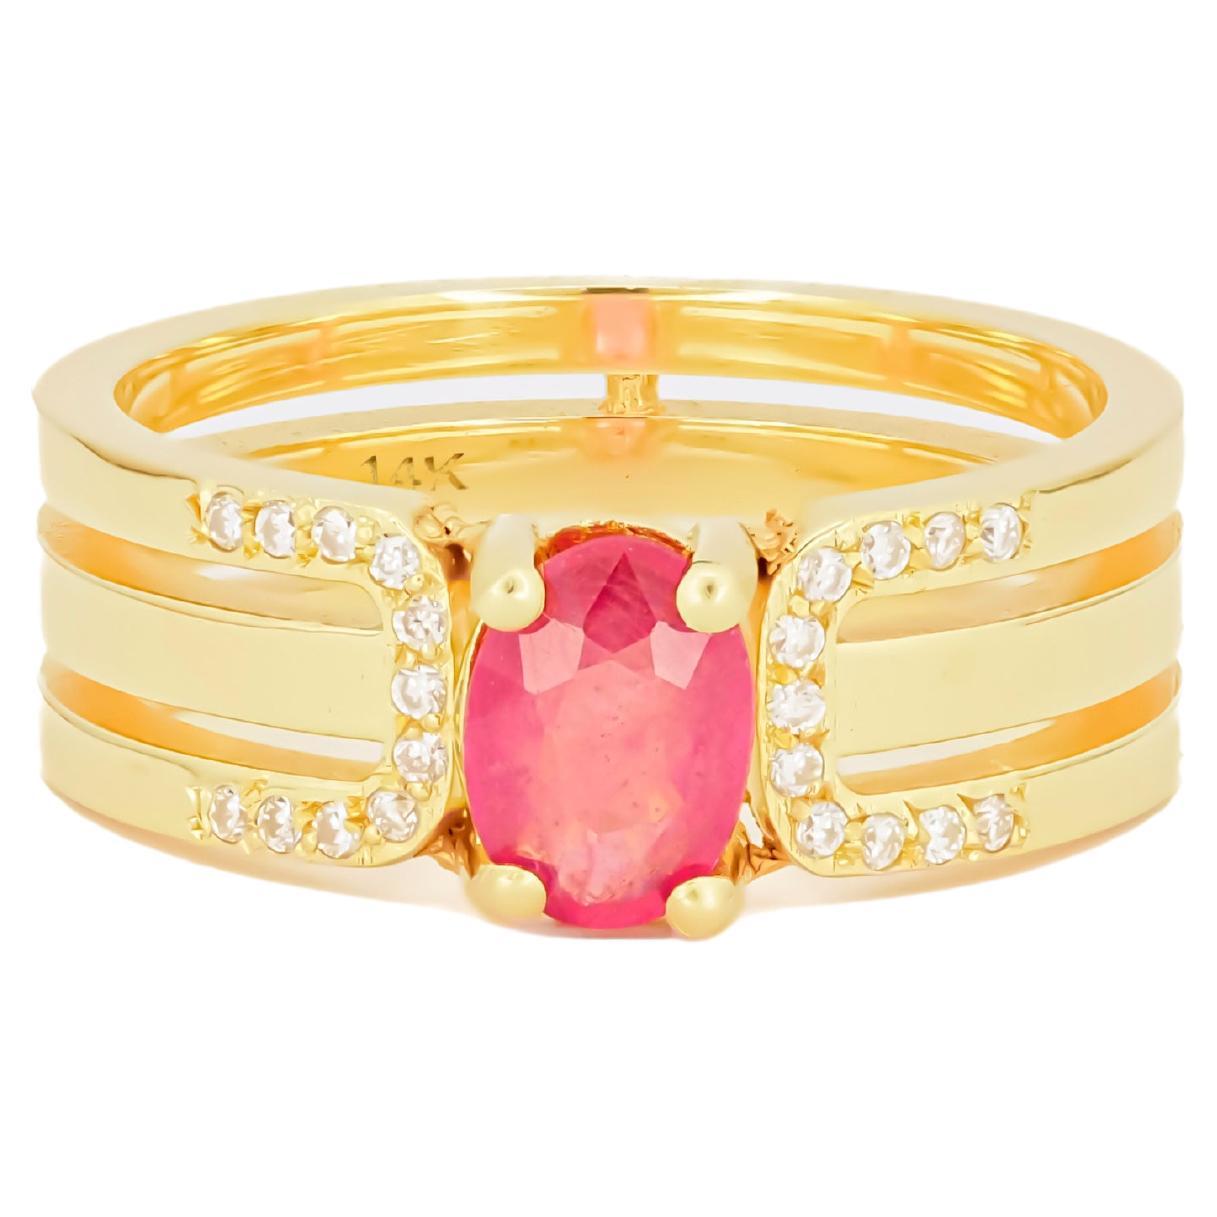 14 K Gold Mens Ring with Ruby.  For Sale